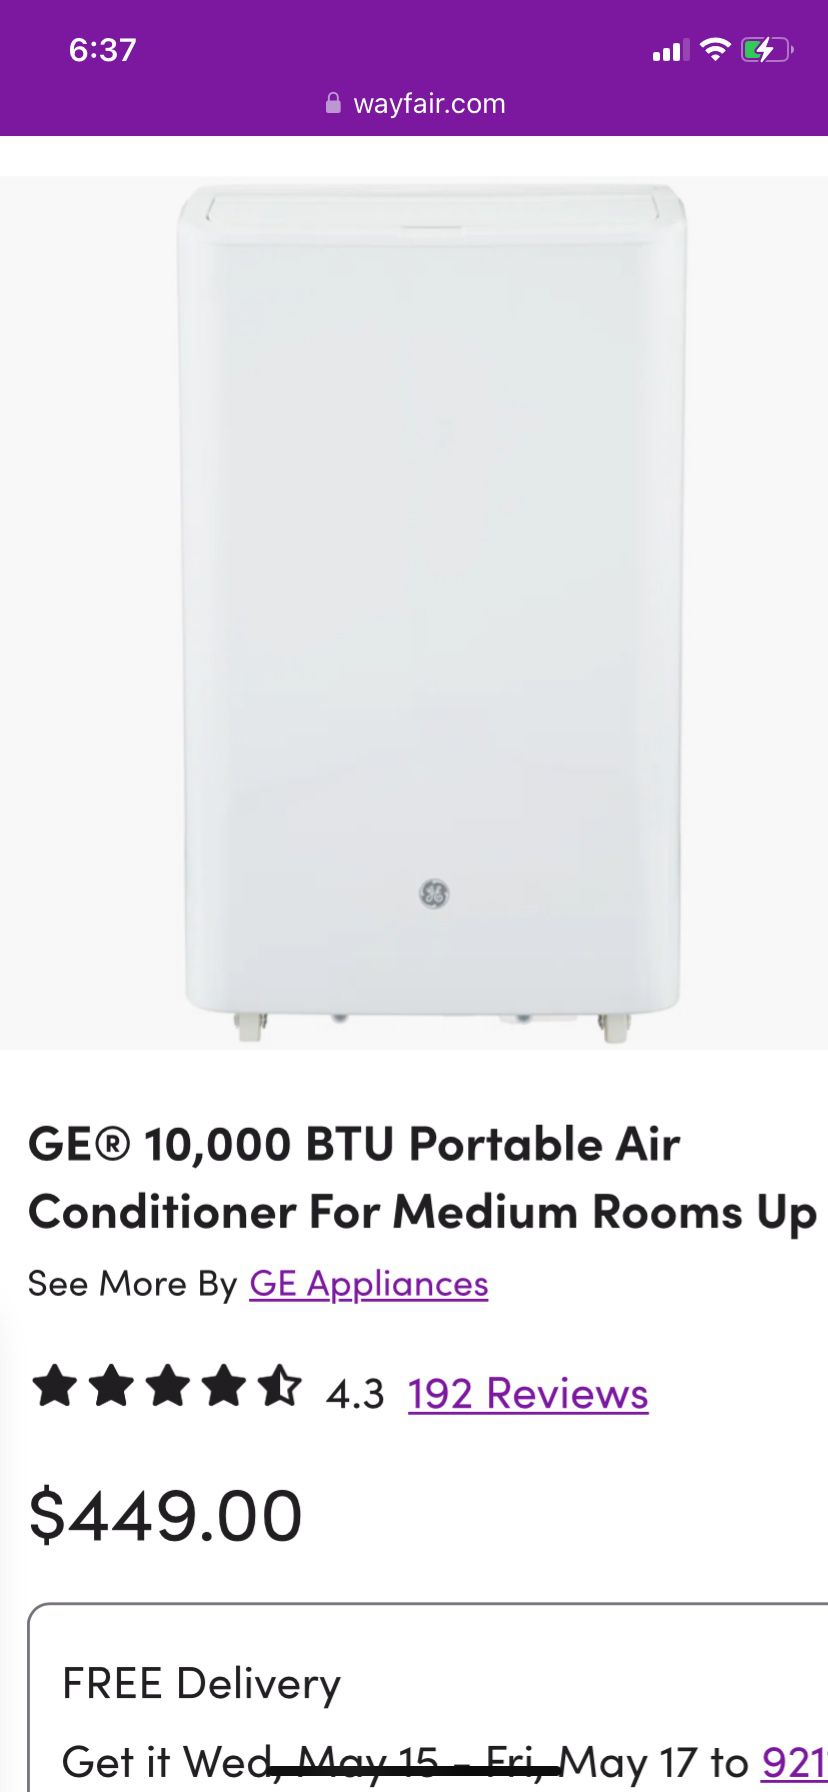 GE PORTABLE ROOM AIR CONDITIONERs